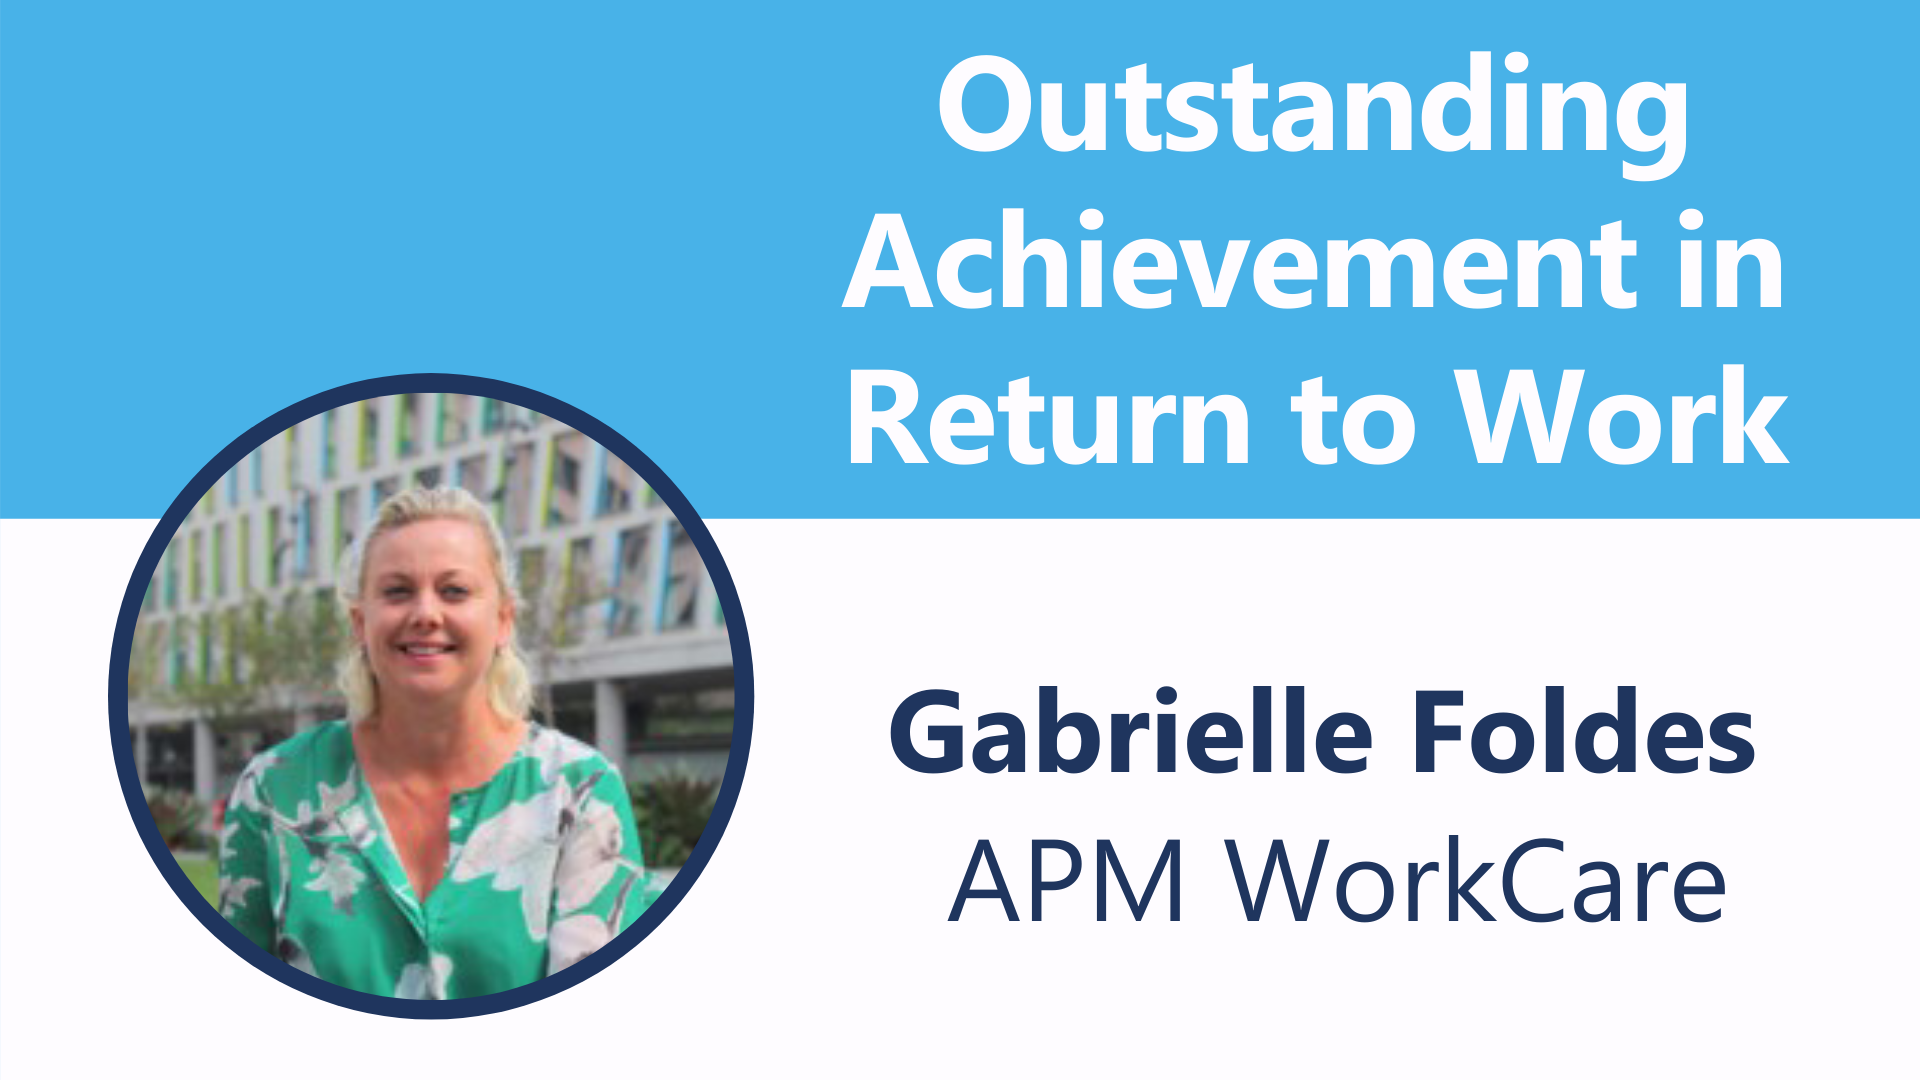 APM WorkCare team members nominated for an award